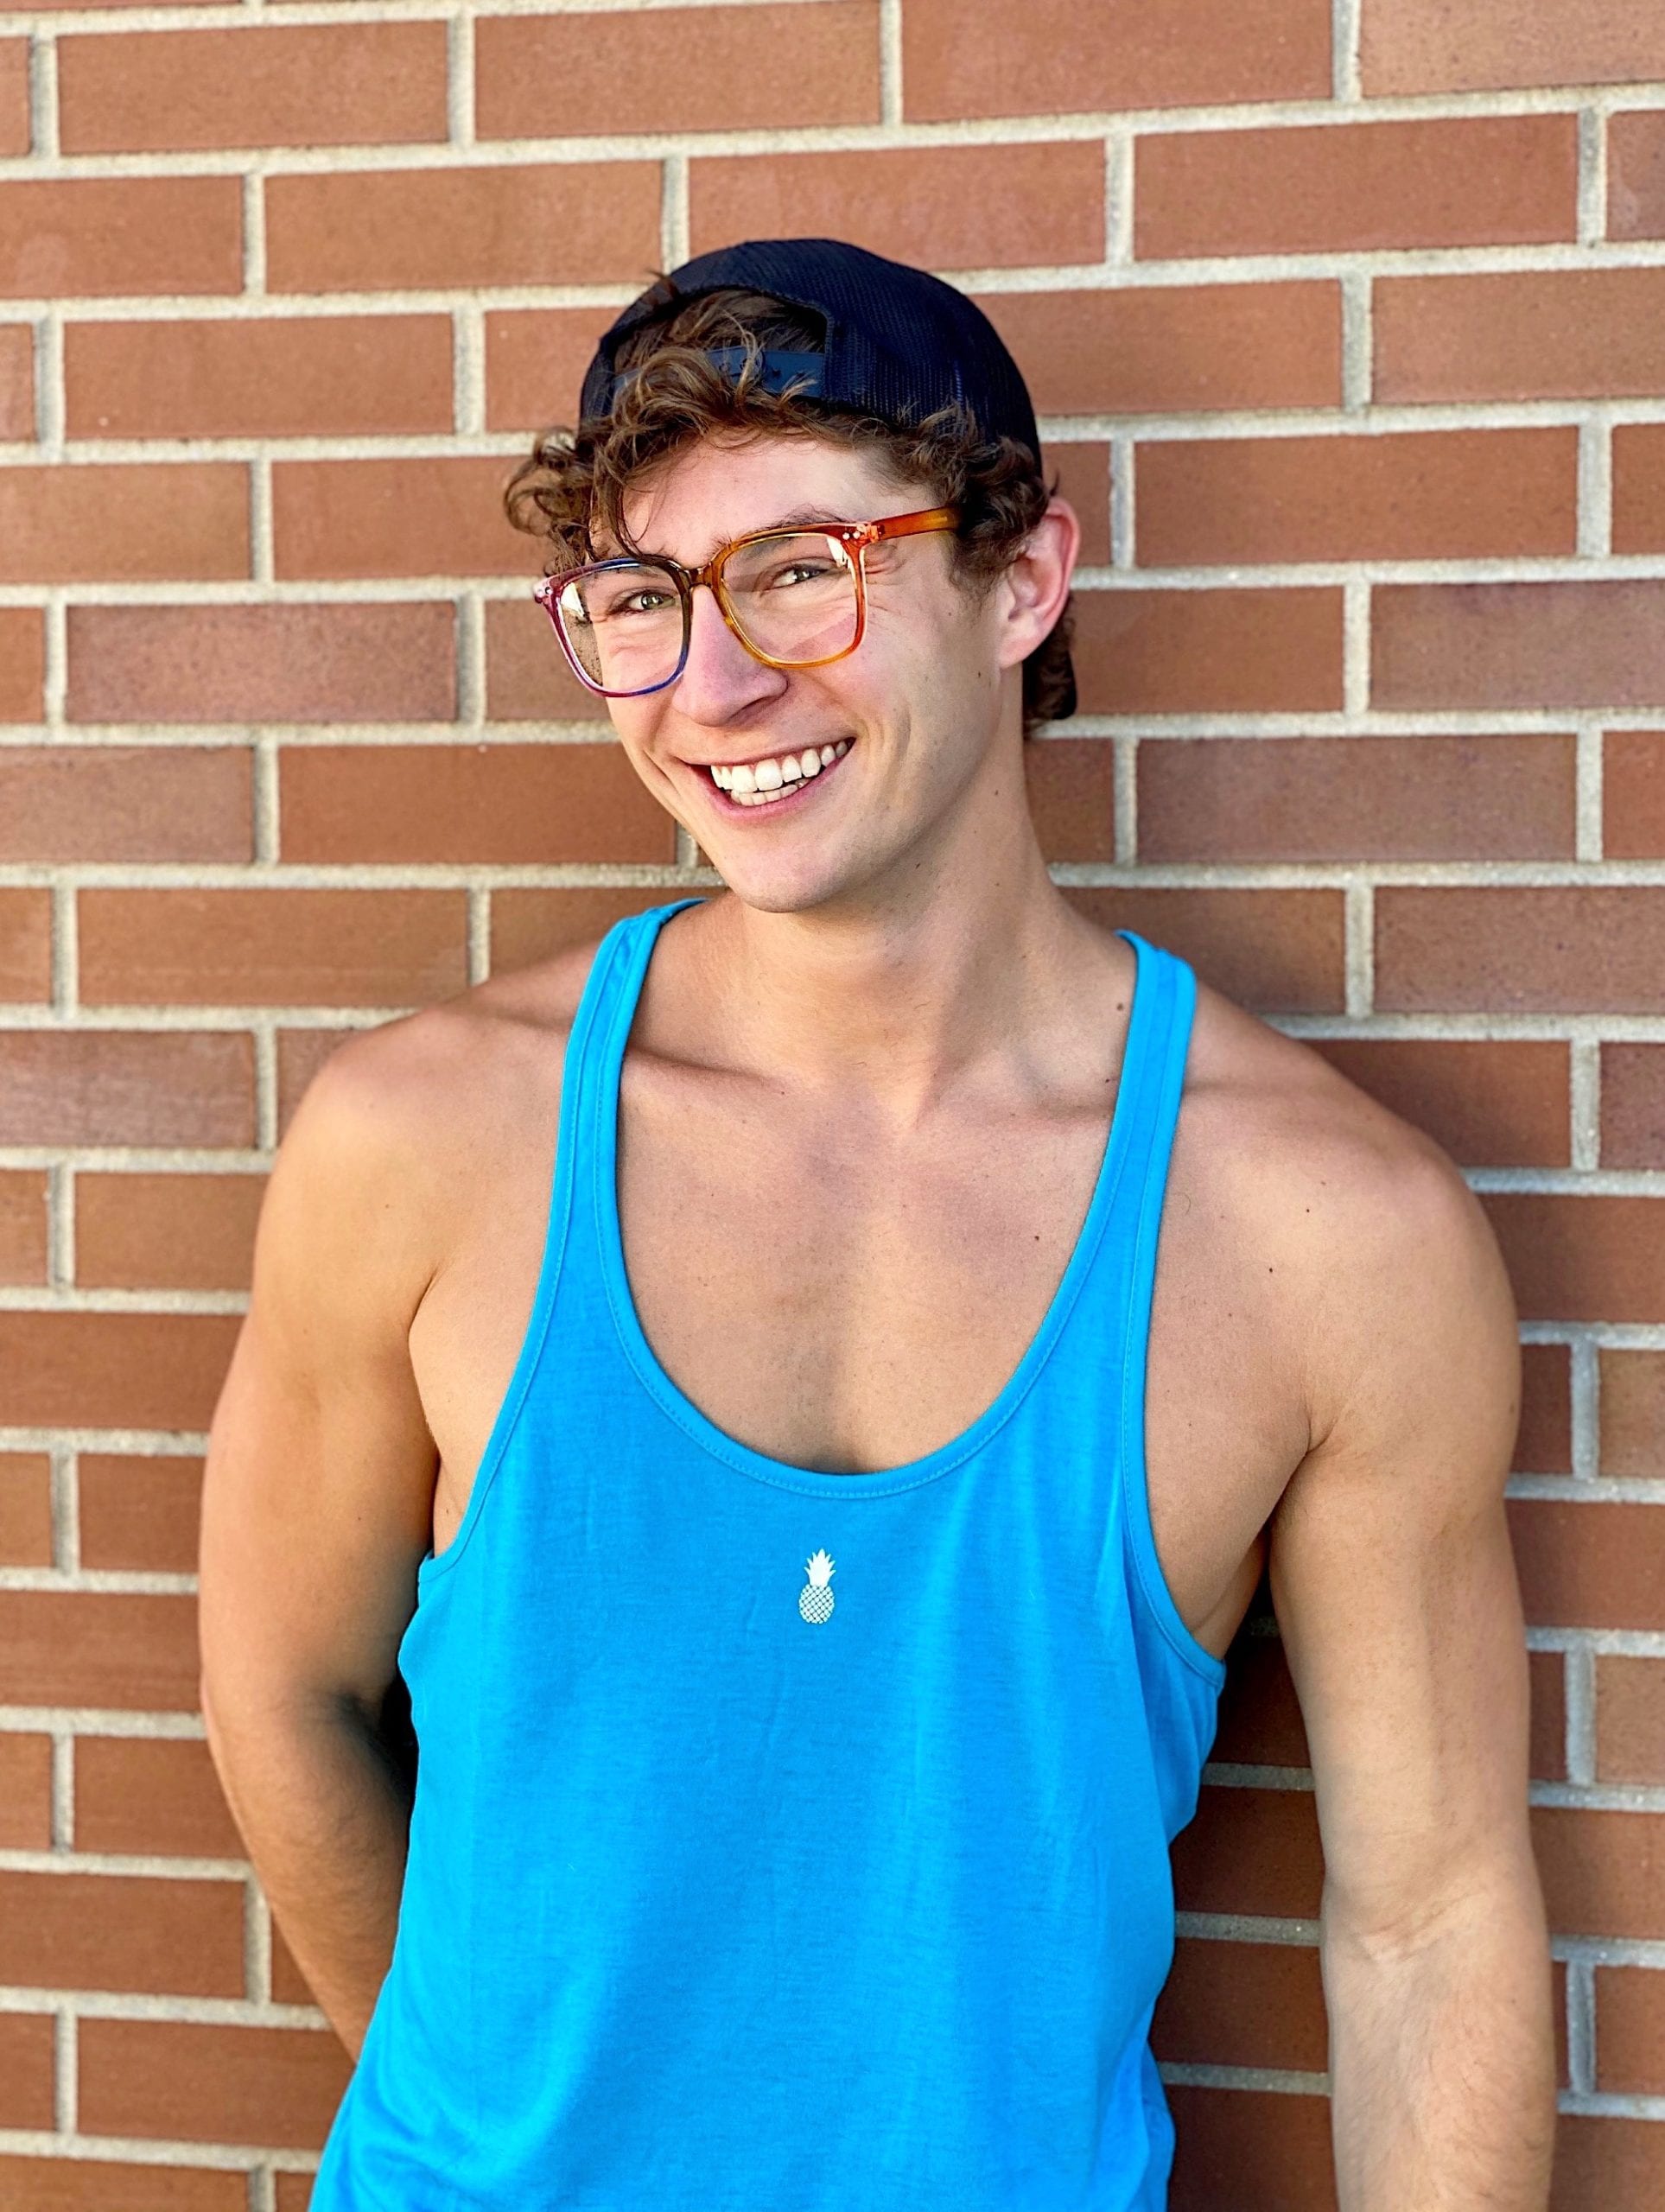 A person wearing glasses and a blue tank top